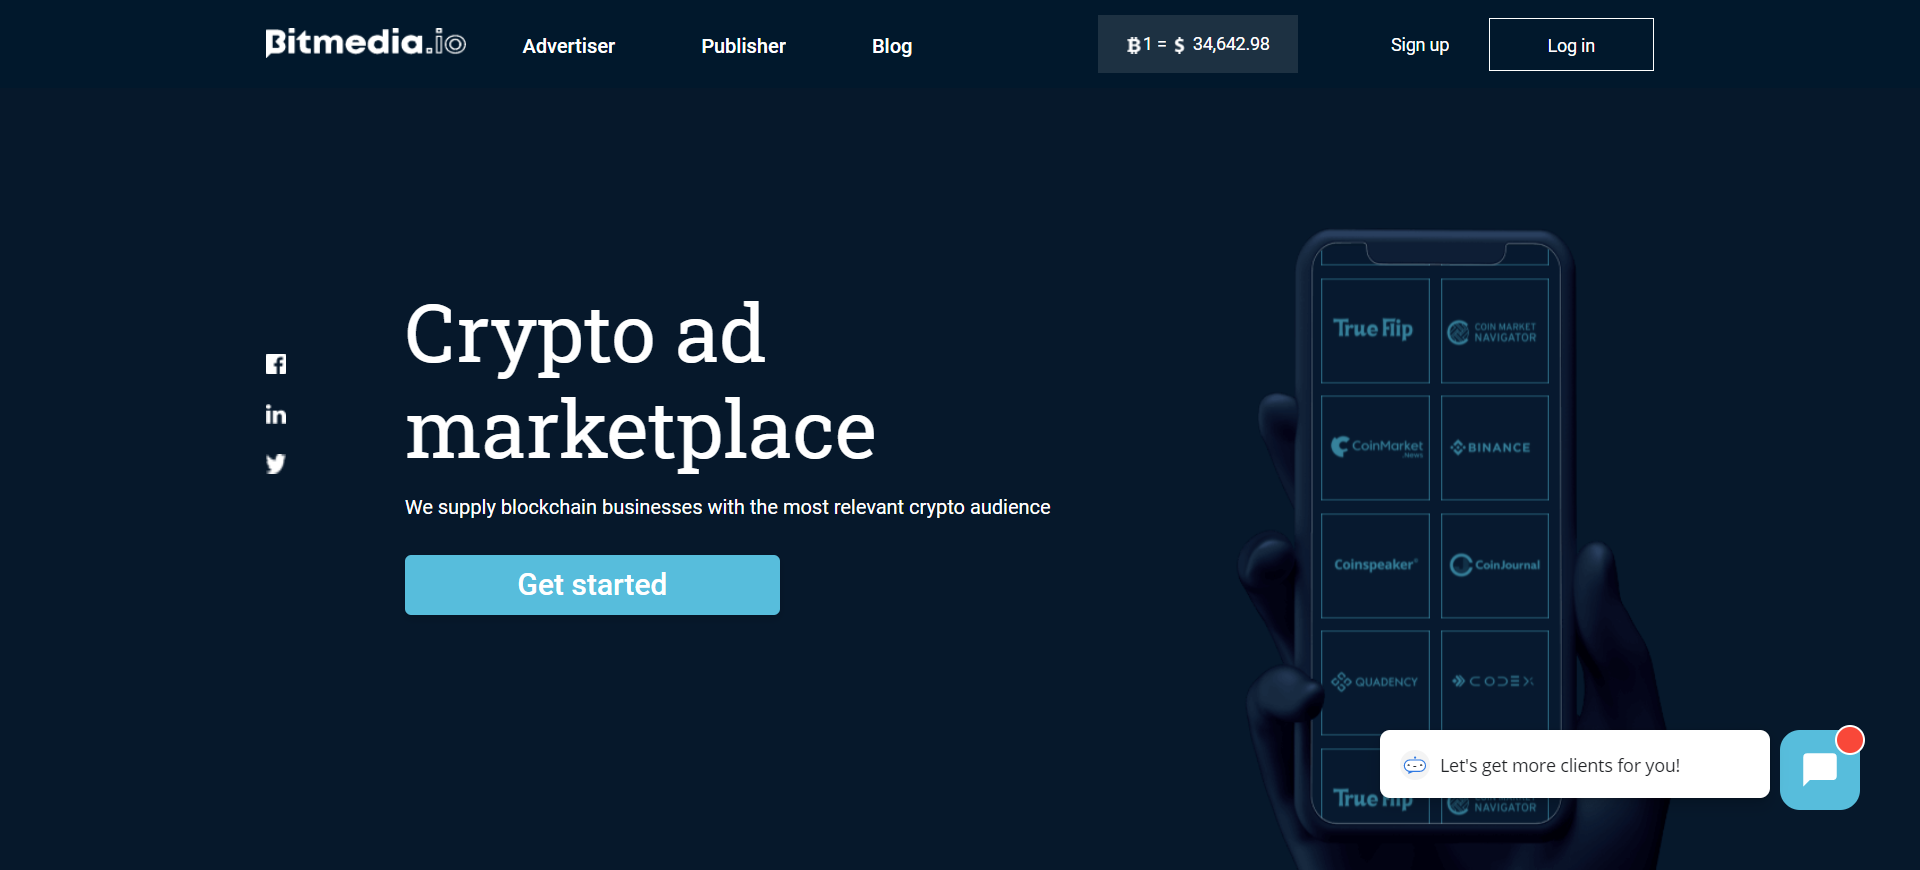 Bitmedia advertises crypto projects in a novel way